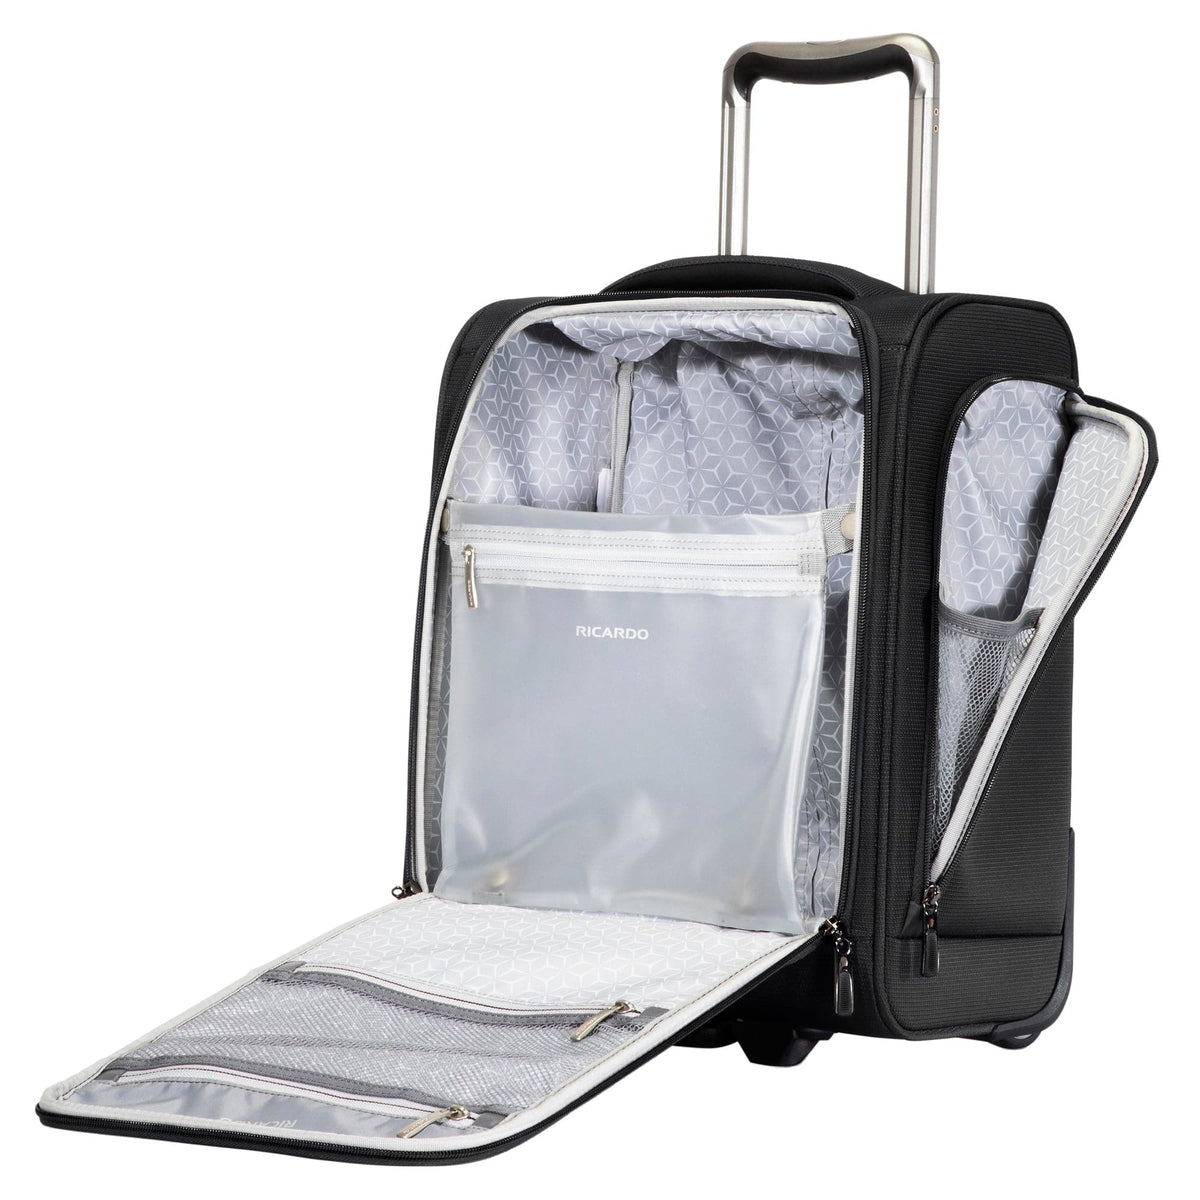 Ricardo Beverly Hills Seahaven 2.0 Softside Underseat Carry-On Luggage